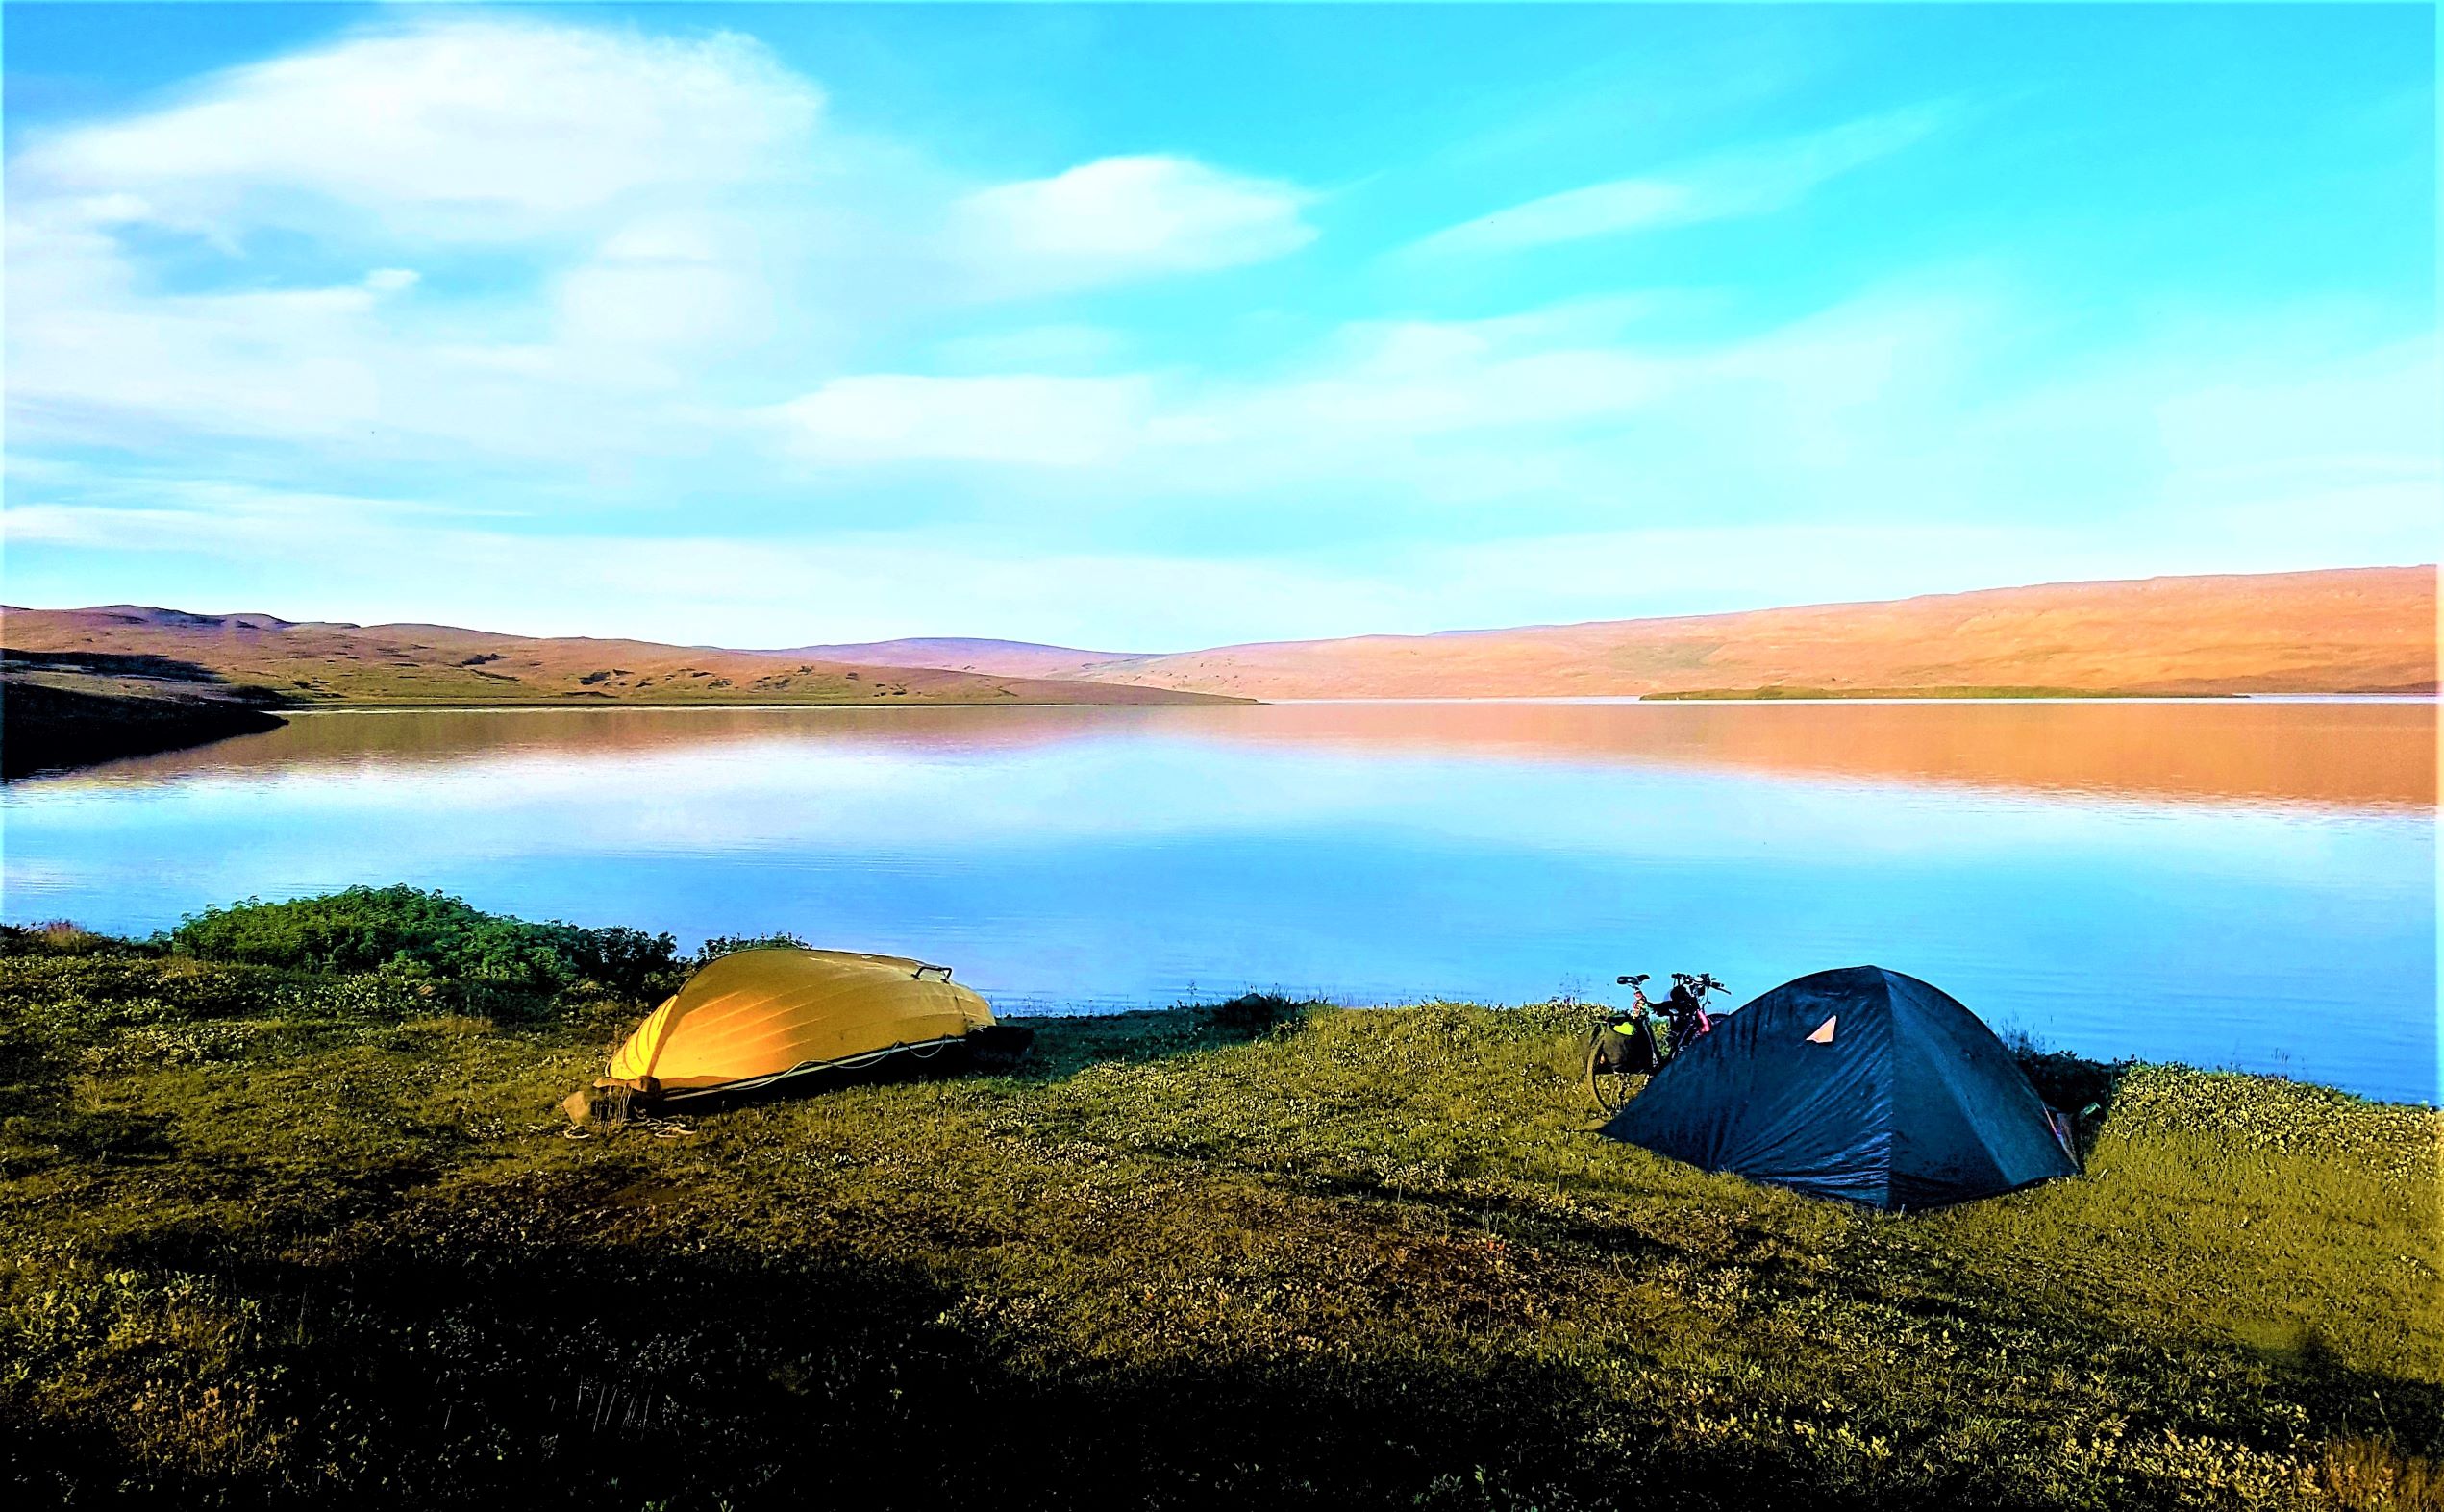 Two tents - one yellow, one blue - pitched next to a lake in Iceland on a bright and sunny day